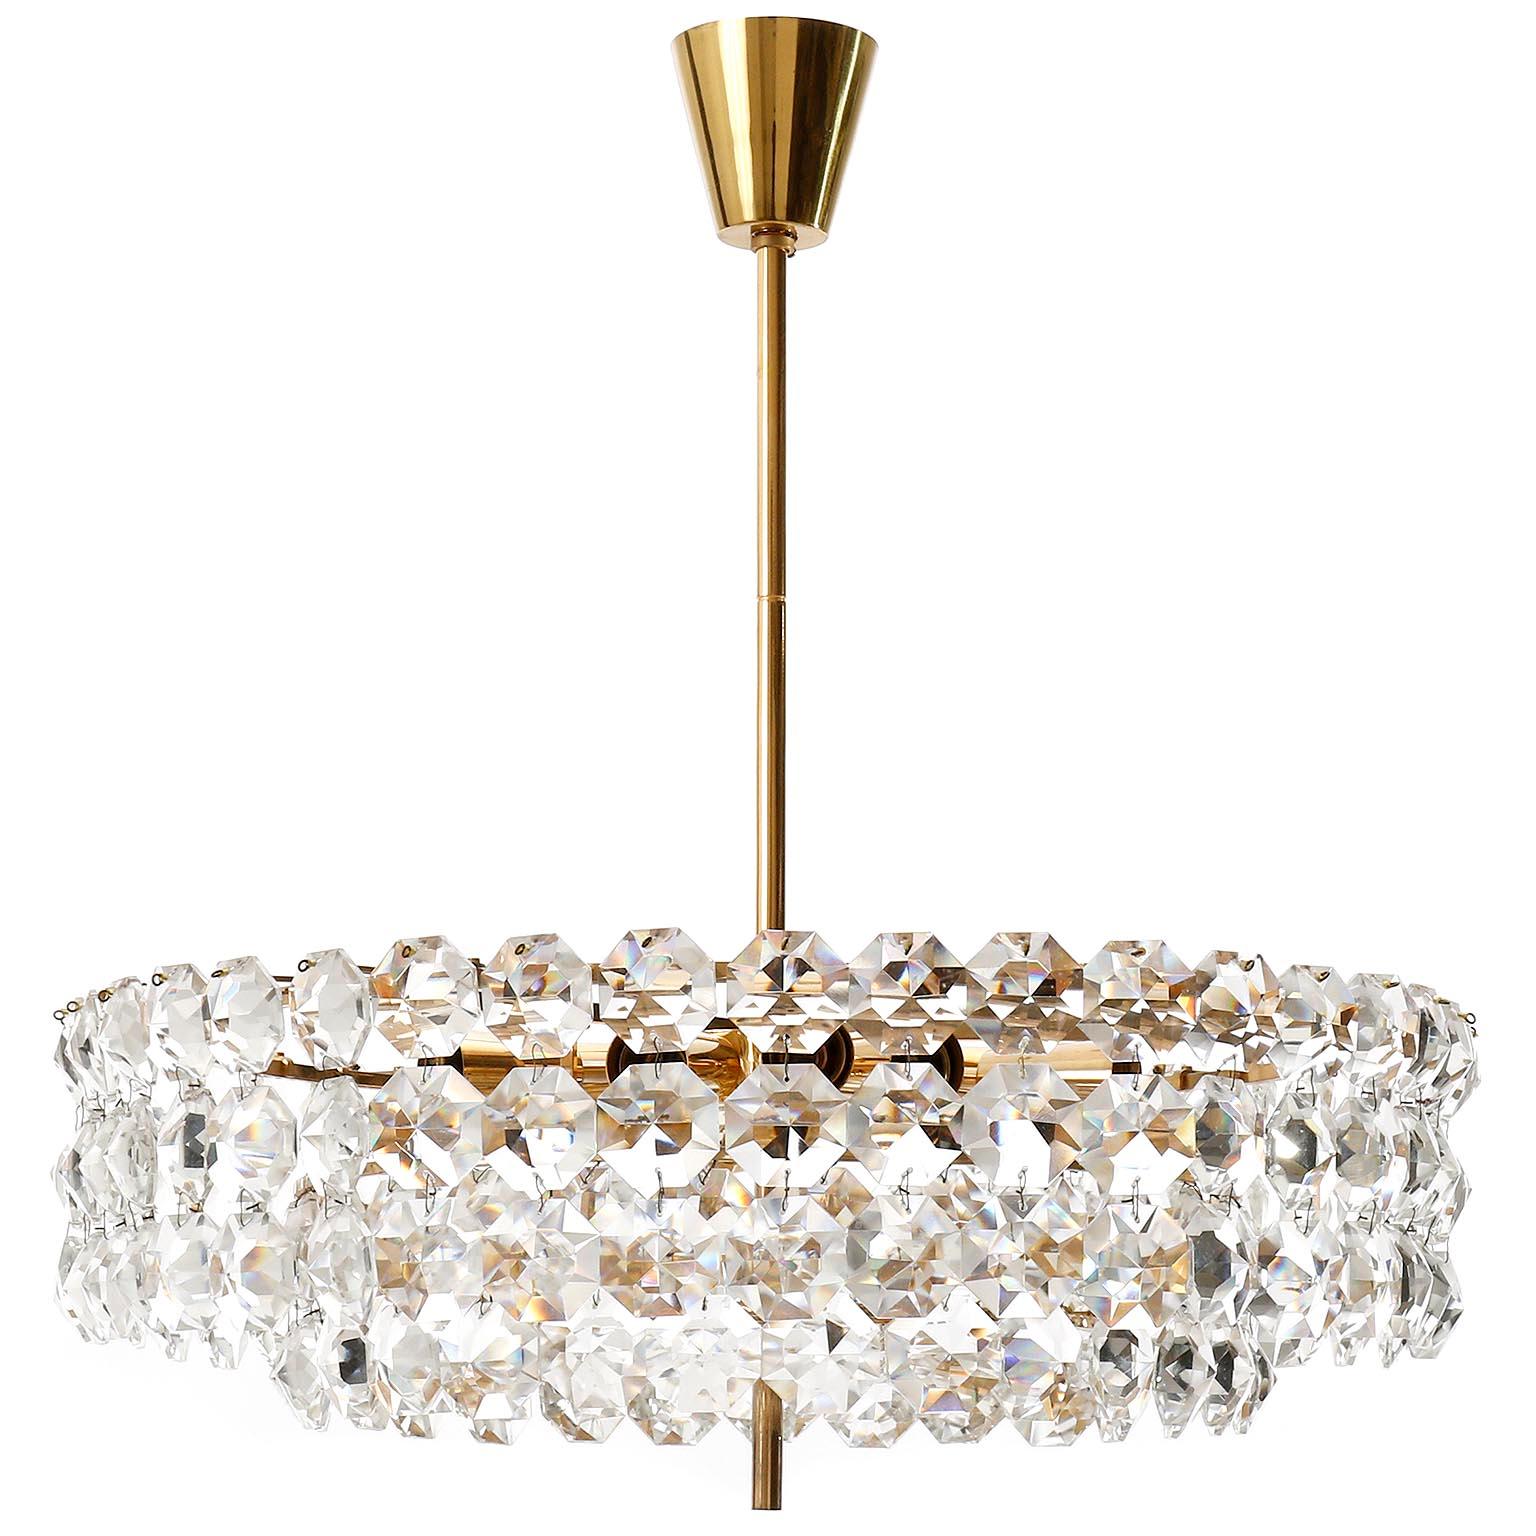 A very exclusive and high quality gold plated chandelier by Bakalowits & Soehne, Austria, manufactured in Mid-Century, circa 1960.
The light fixutre is made of a gilded brass frame and hand cut diamond shaped crystal glasses. There are twelve